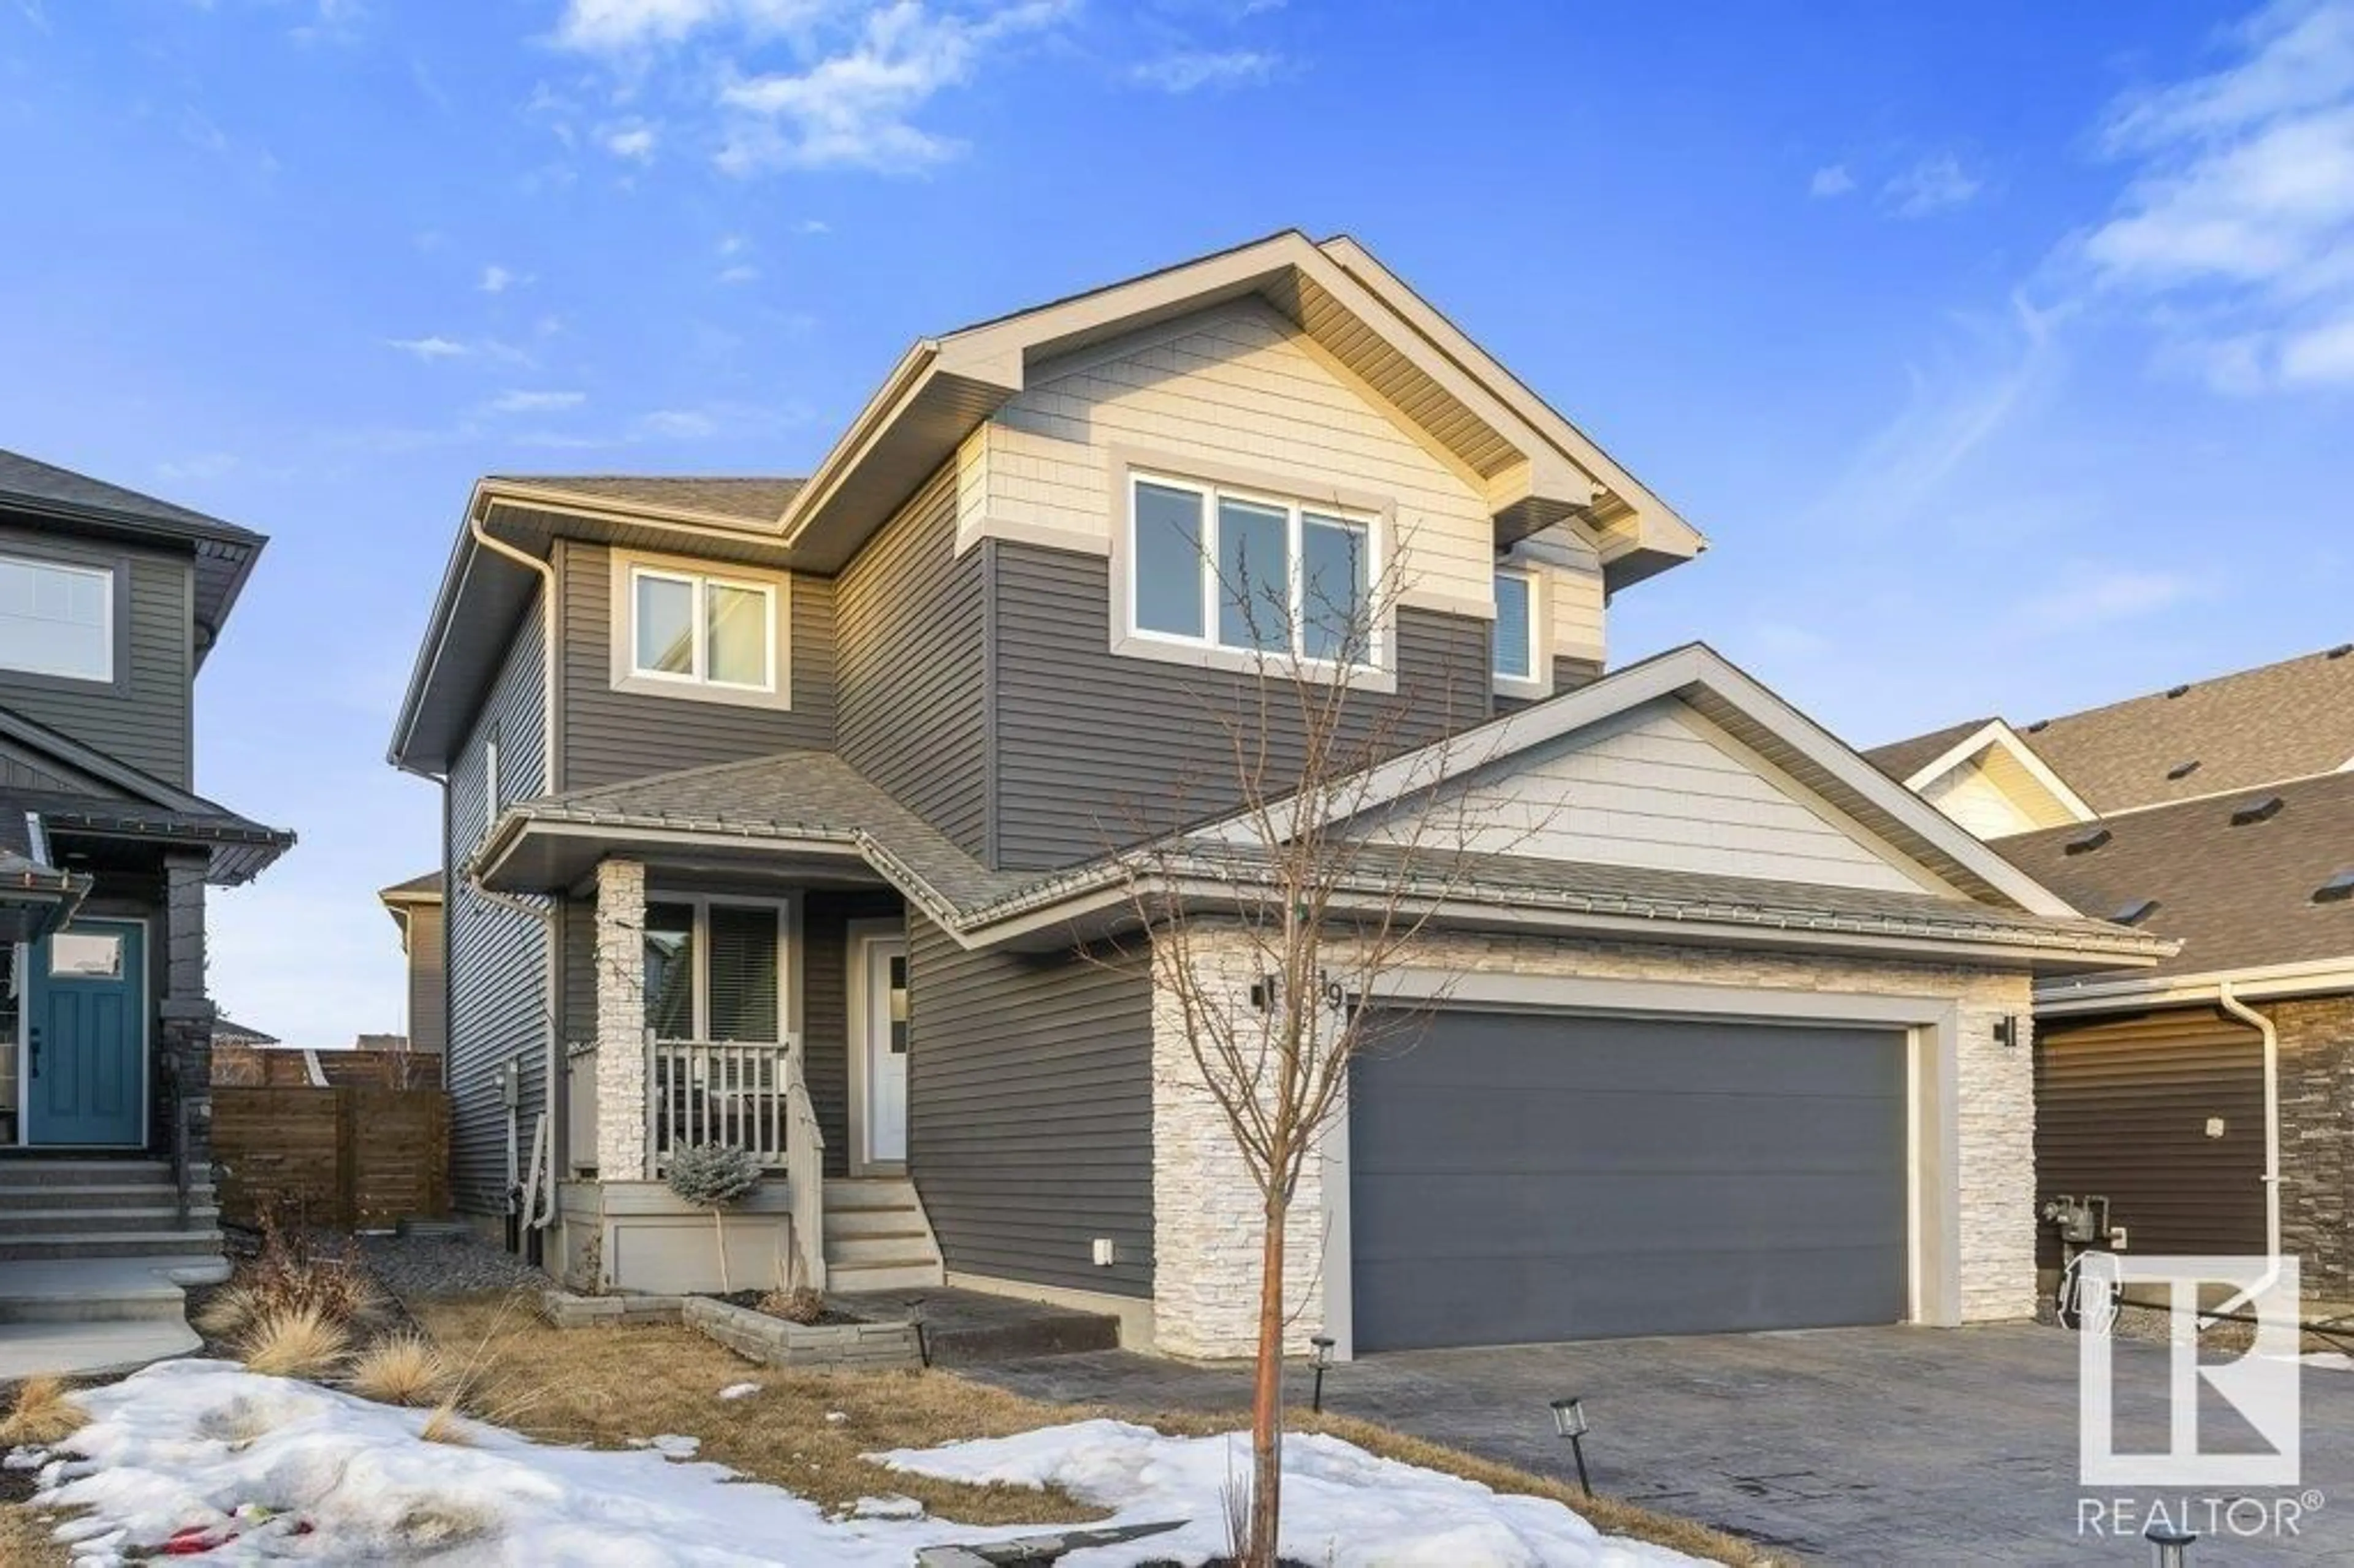 Home with stucco exterior material for 19 RATELLE CI, St. Albert Alberta T8N7T8